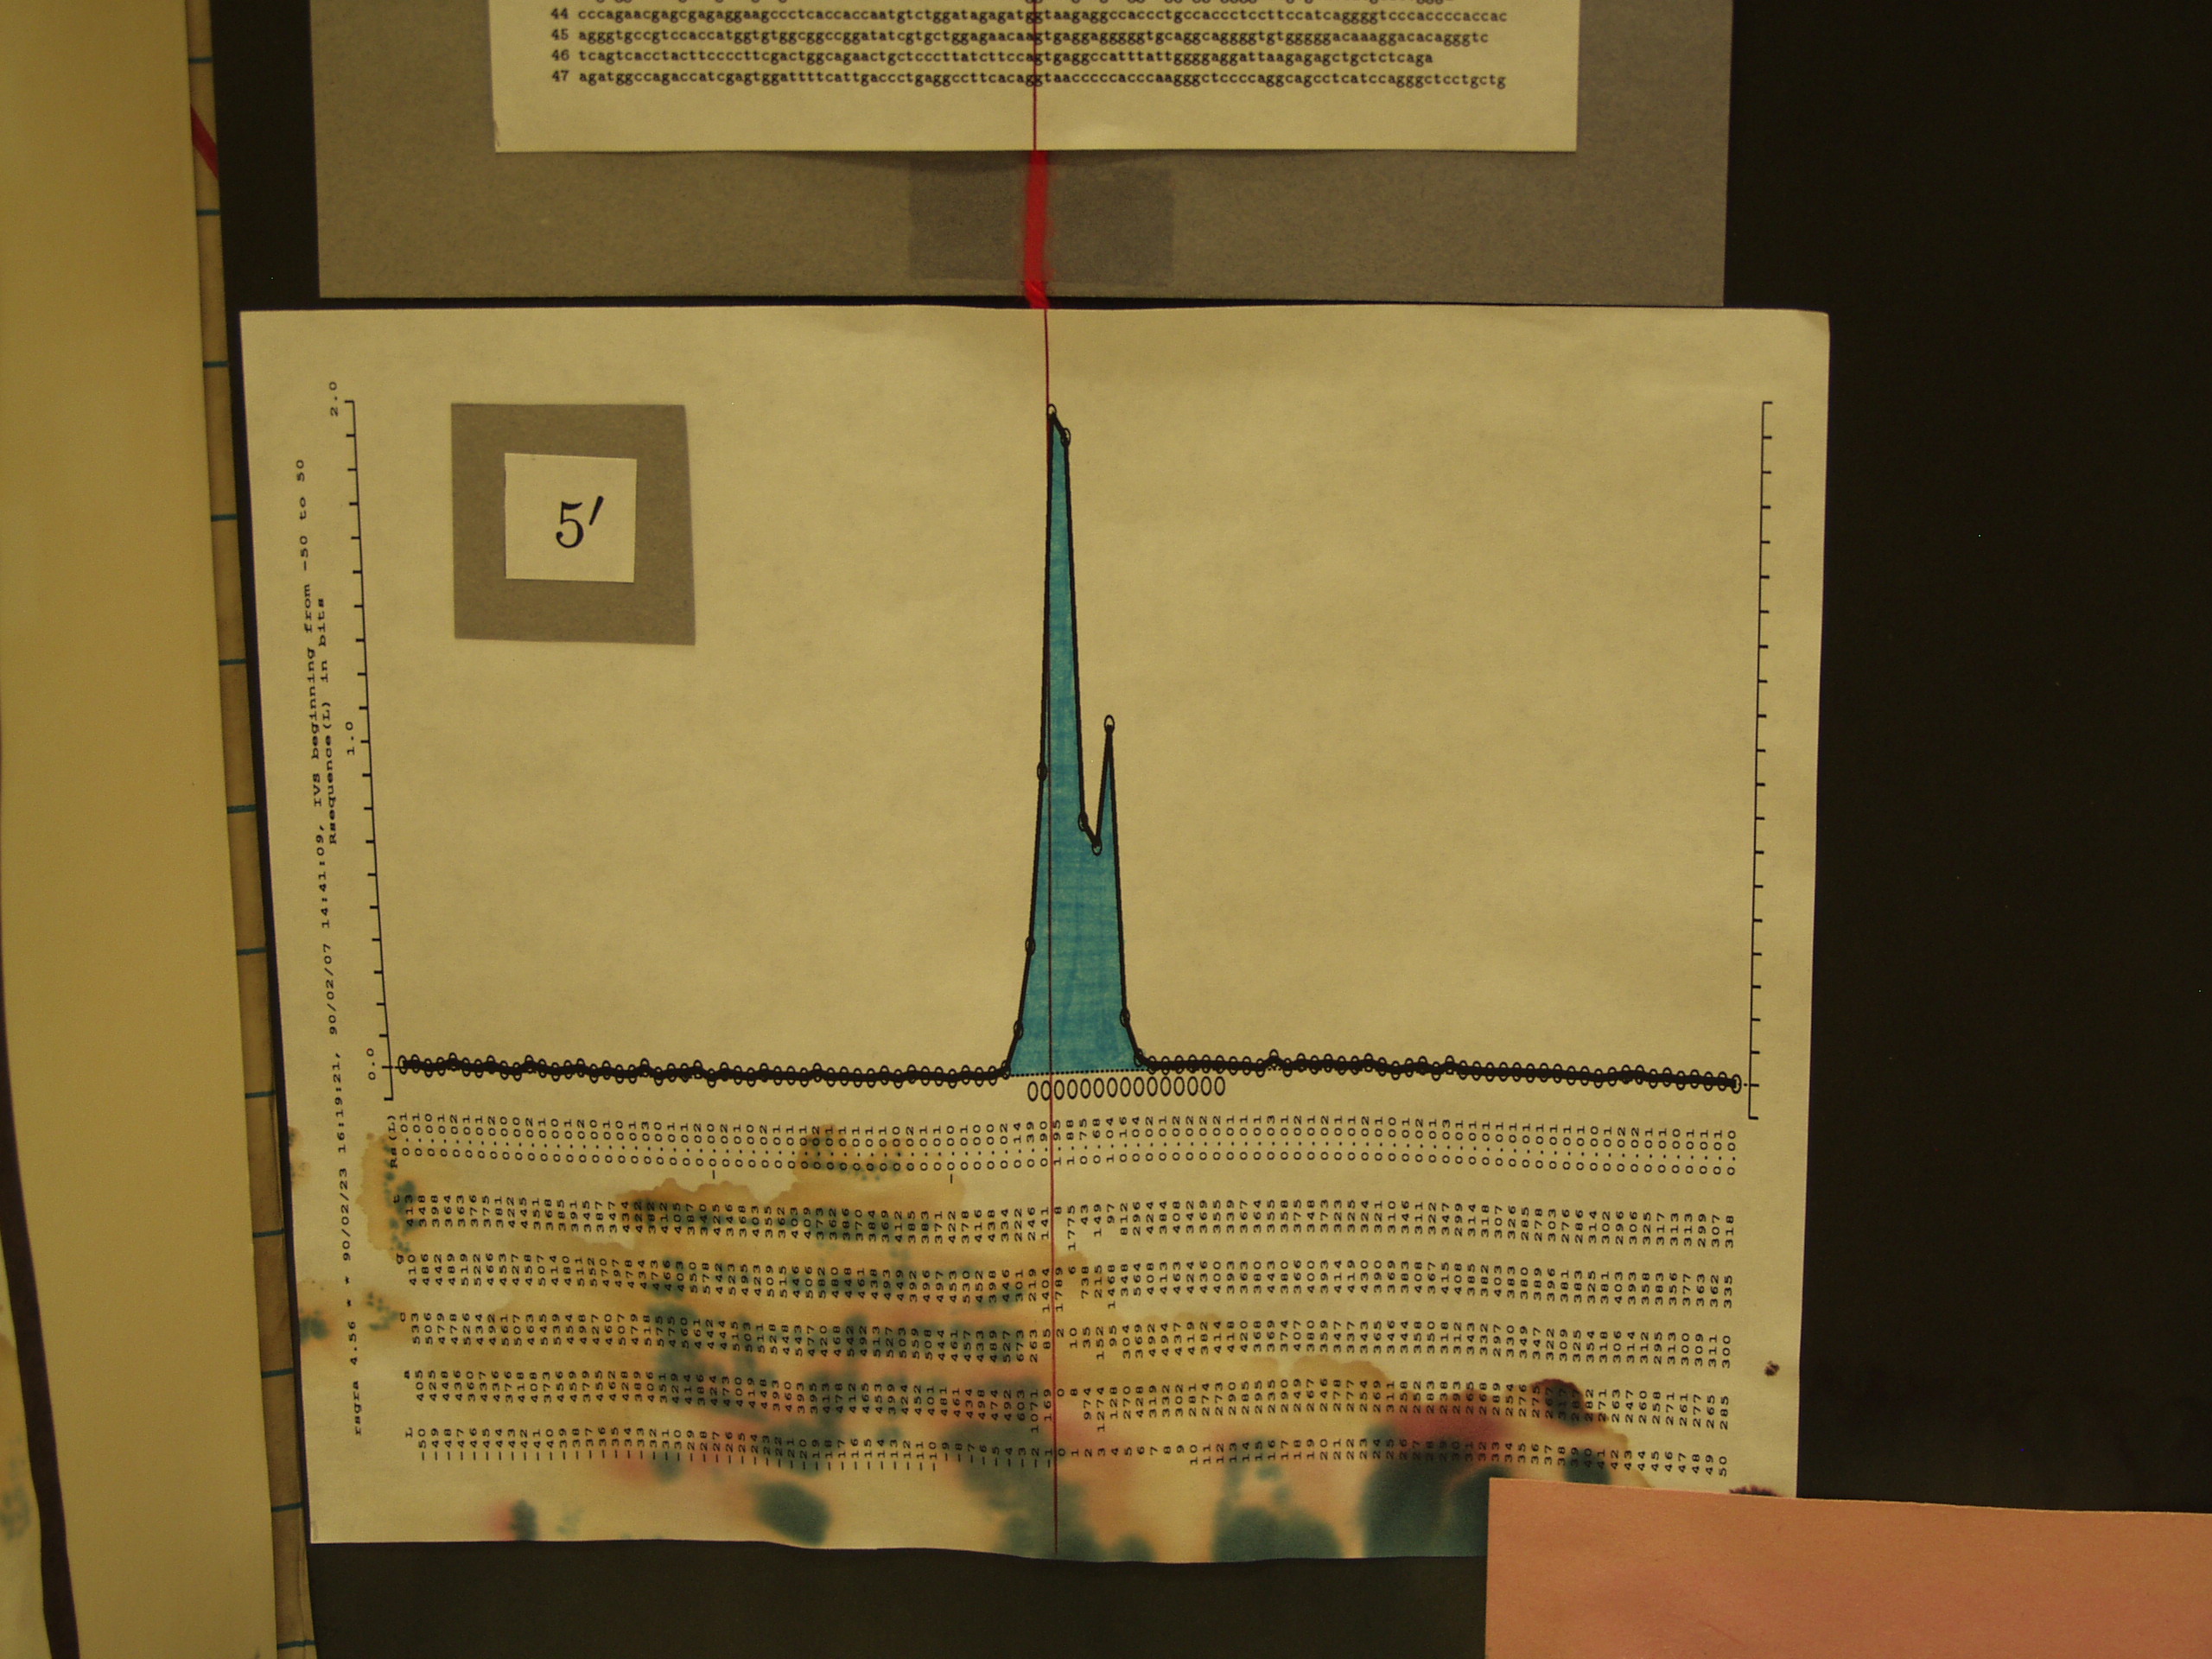 P8237796.JPG Photograph of Mike Stephen's 1990 science fair poster 'Information analysis of RNA splice sites'